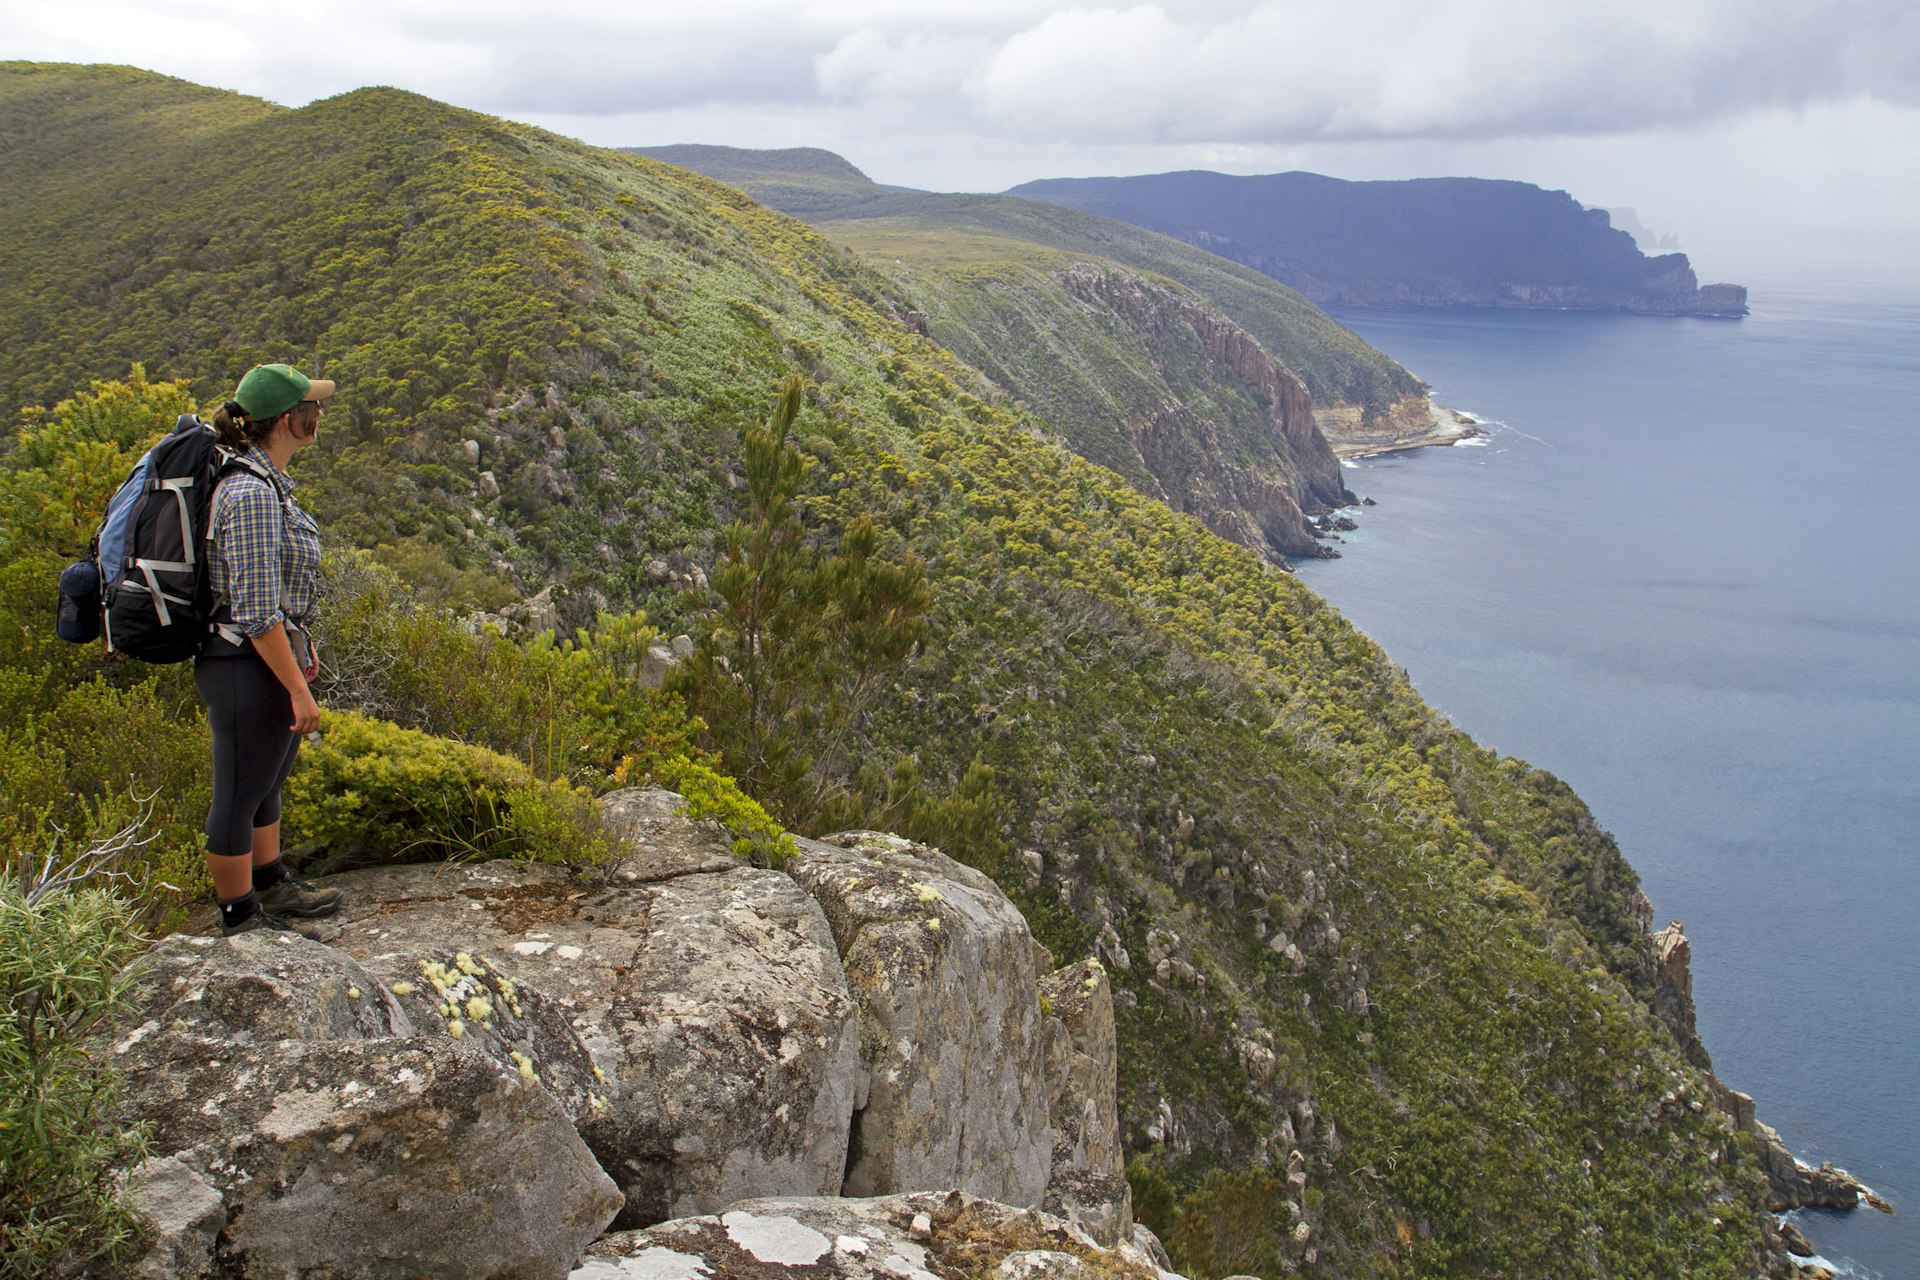 Hiker on Arthurs Peak along the Three Capes Track © Andrew Bain / Lonely Planet